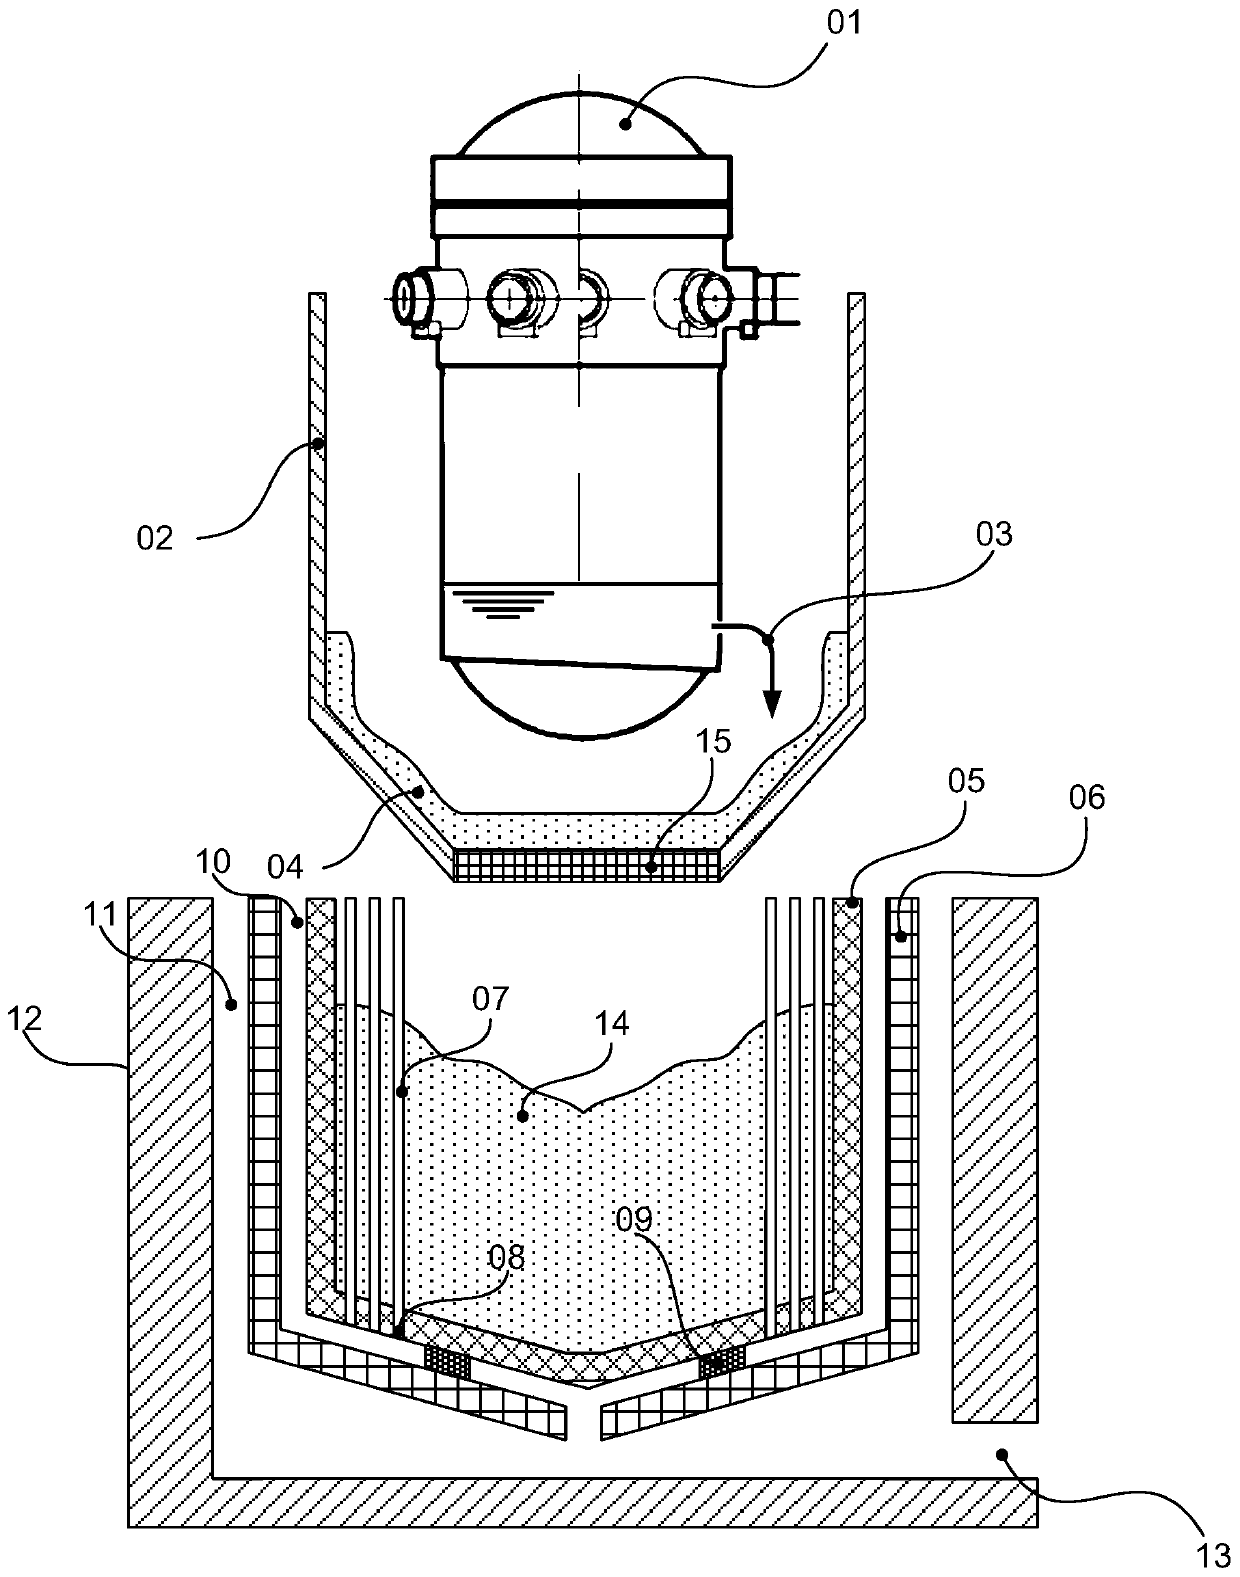 Double-layer crucible reactor core melt capturing device with internal cooling tube